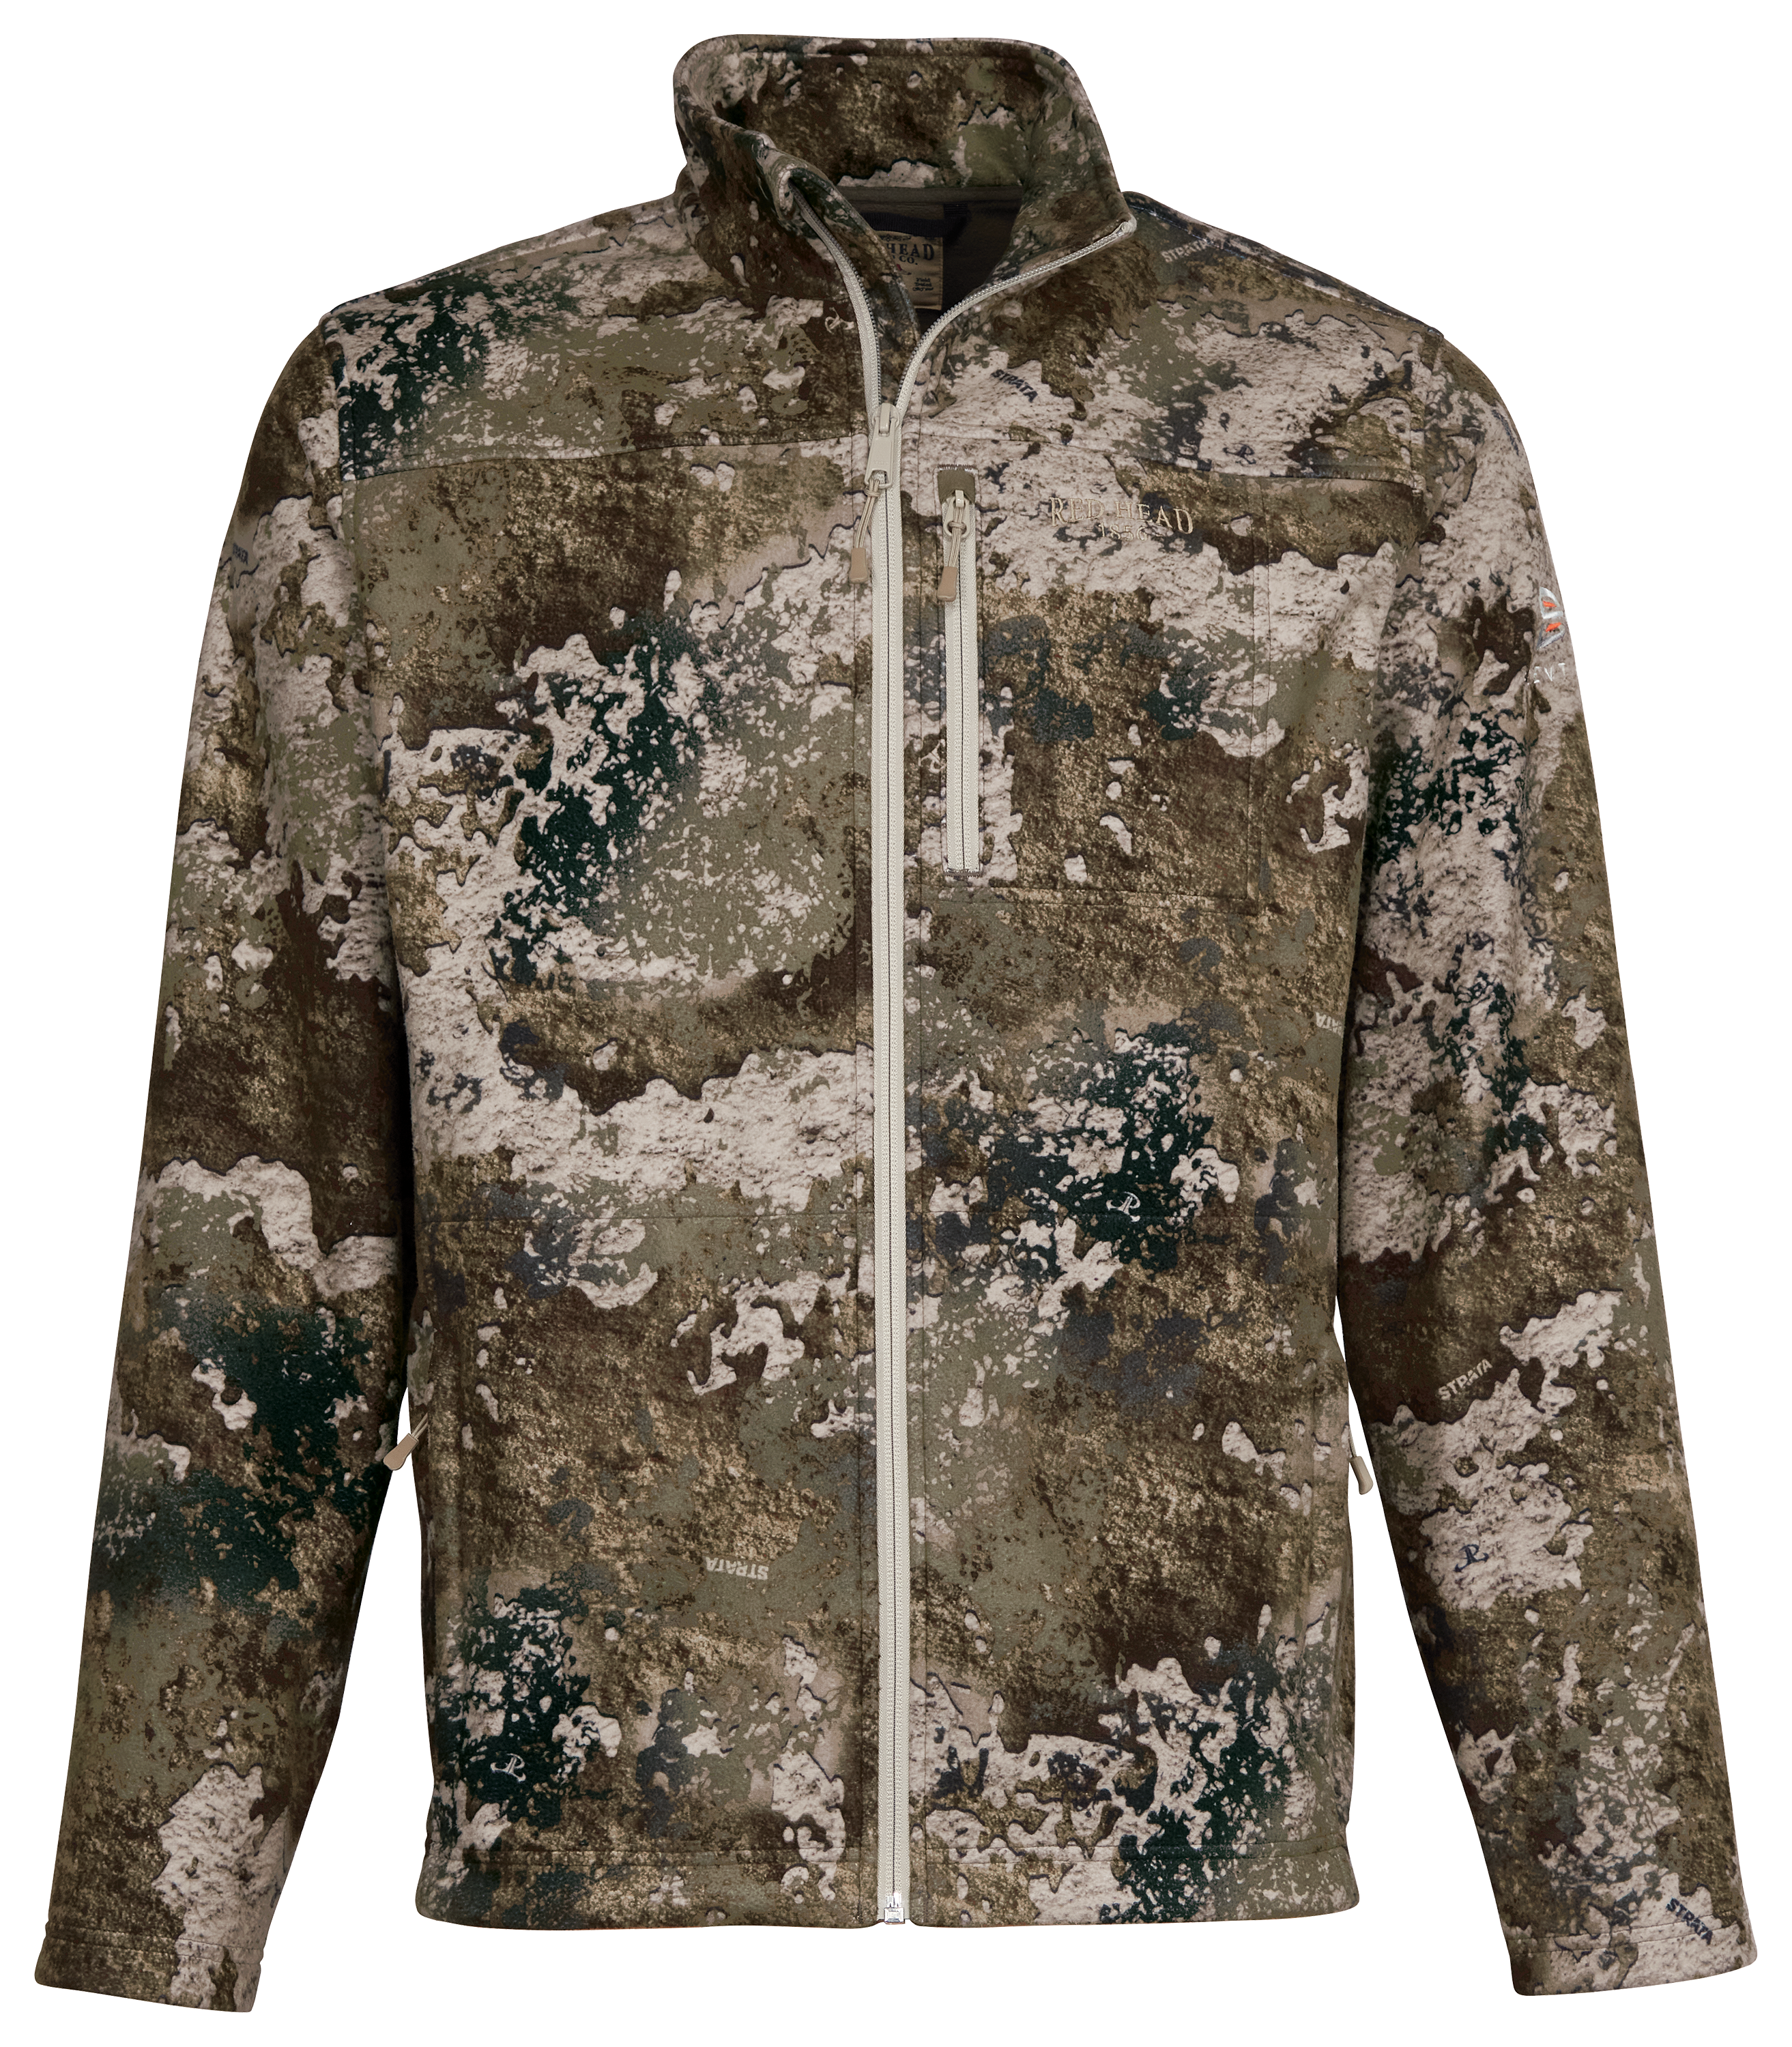 Cabela's Outfitter Series Berber Jacket with 4MOST WINDSHEAR for Men